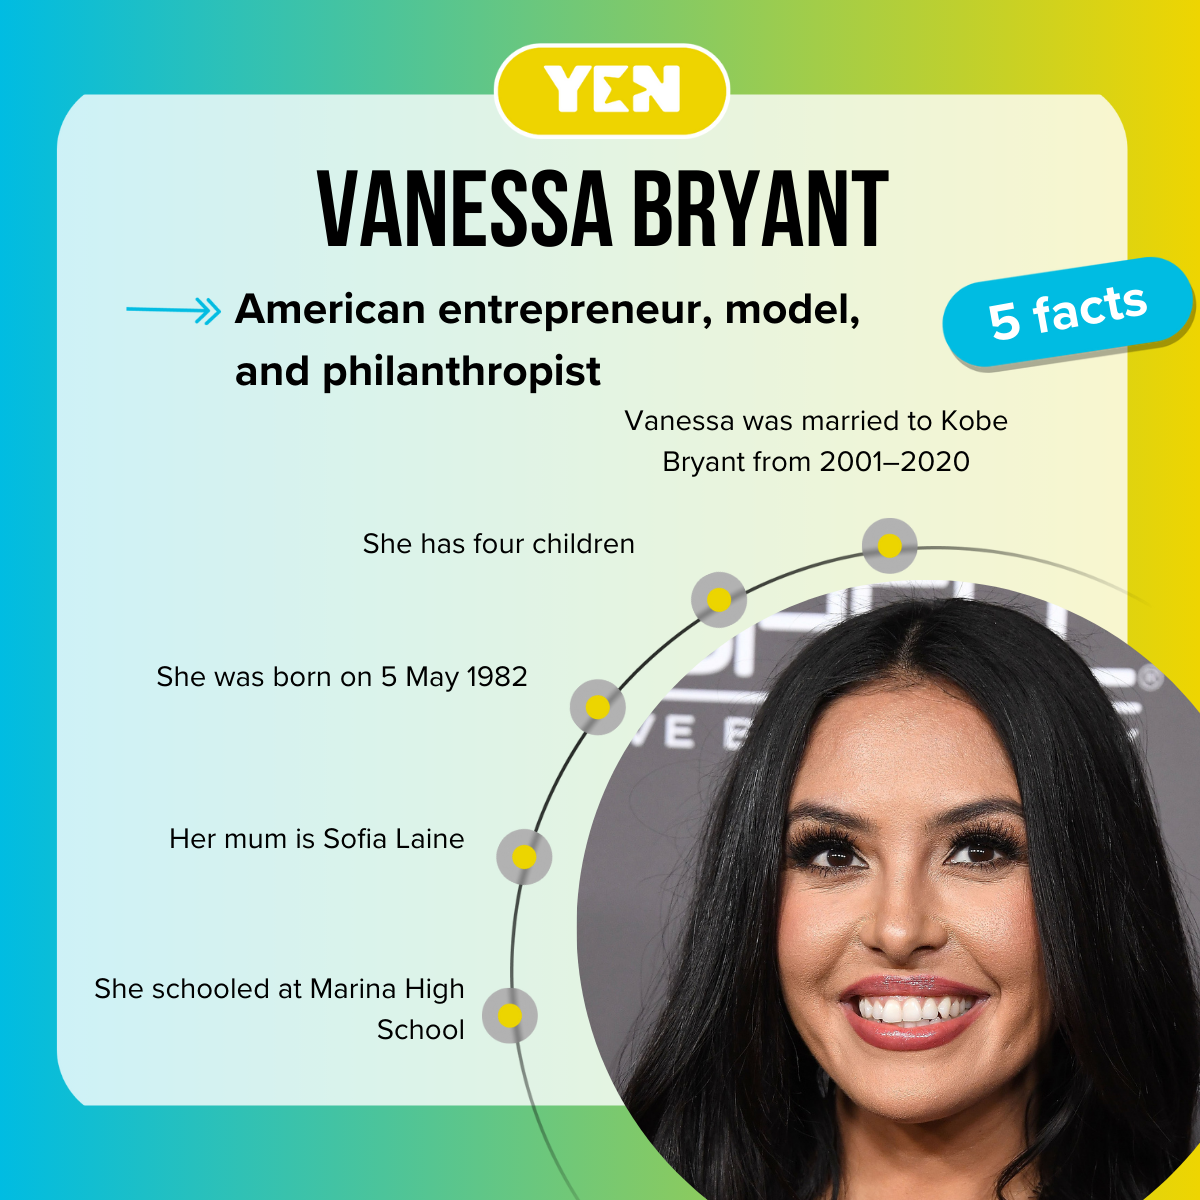 Facts about Vanessa Bryant